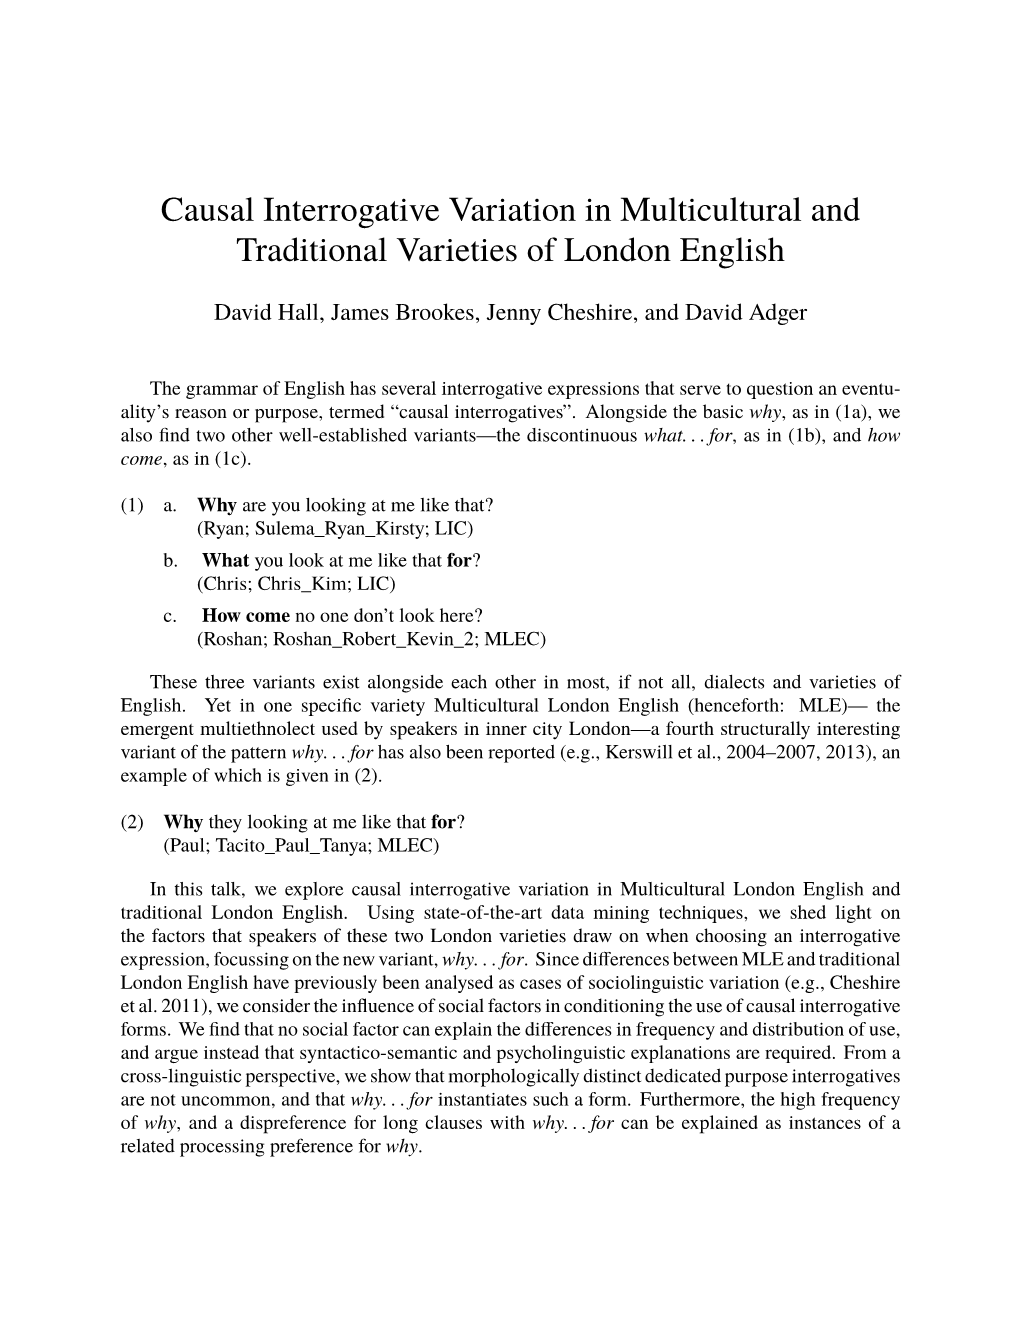 Causal Interrogative Variation in Multicultural and Traditional Varieties of London English